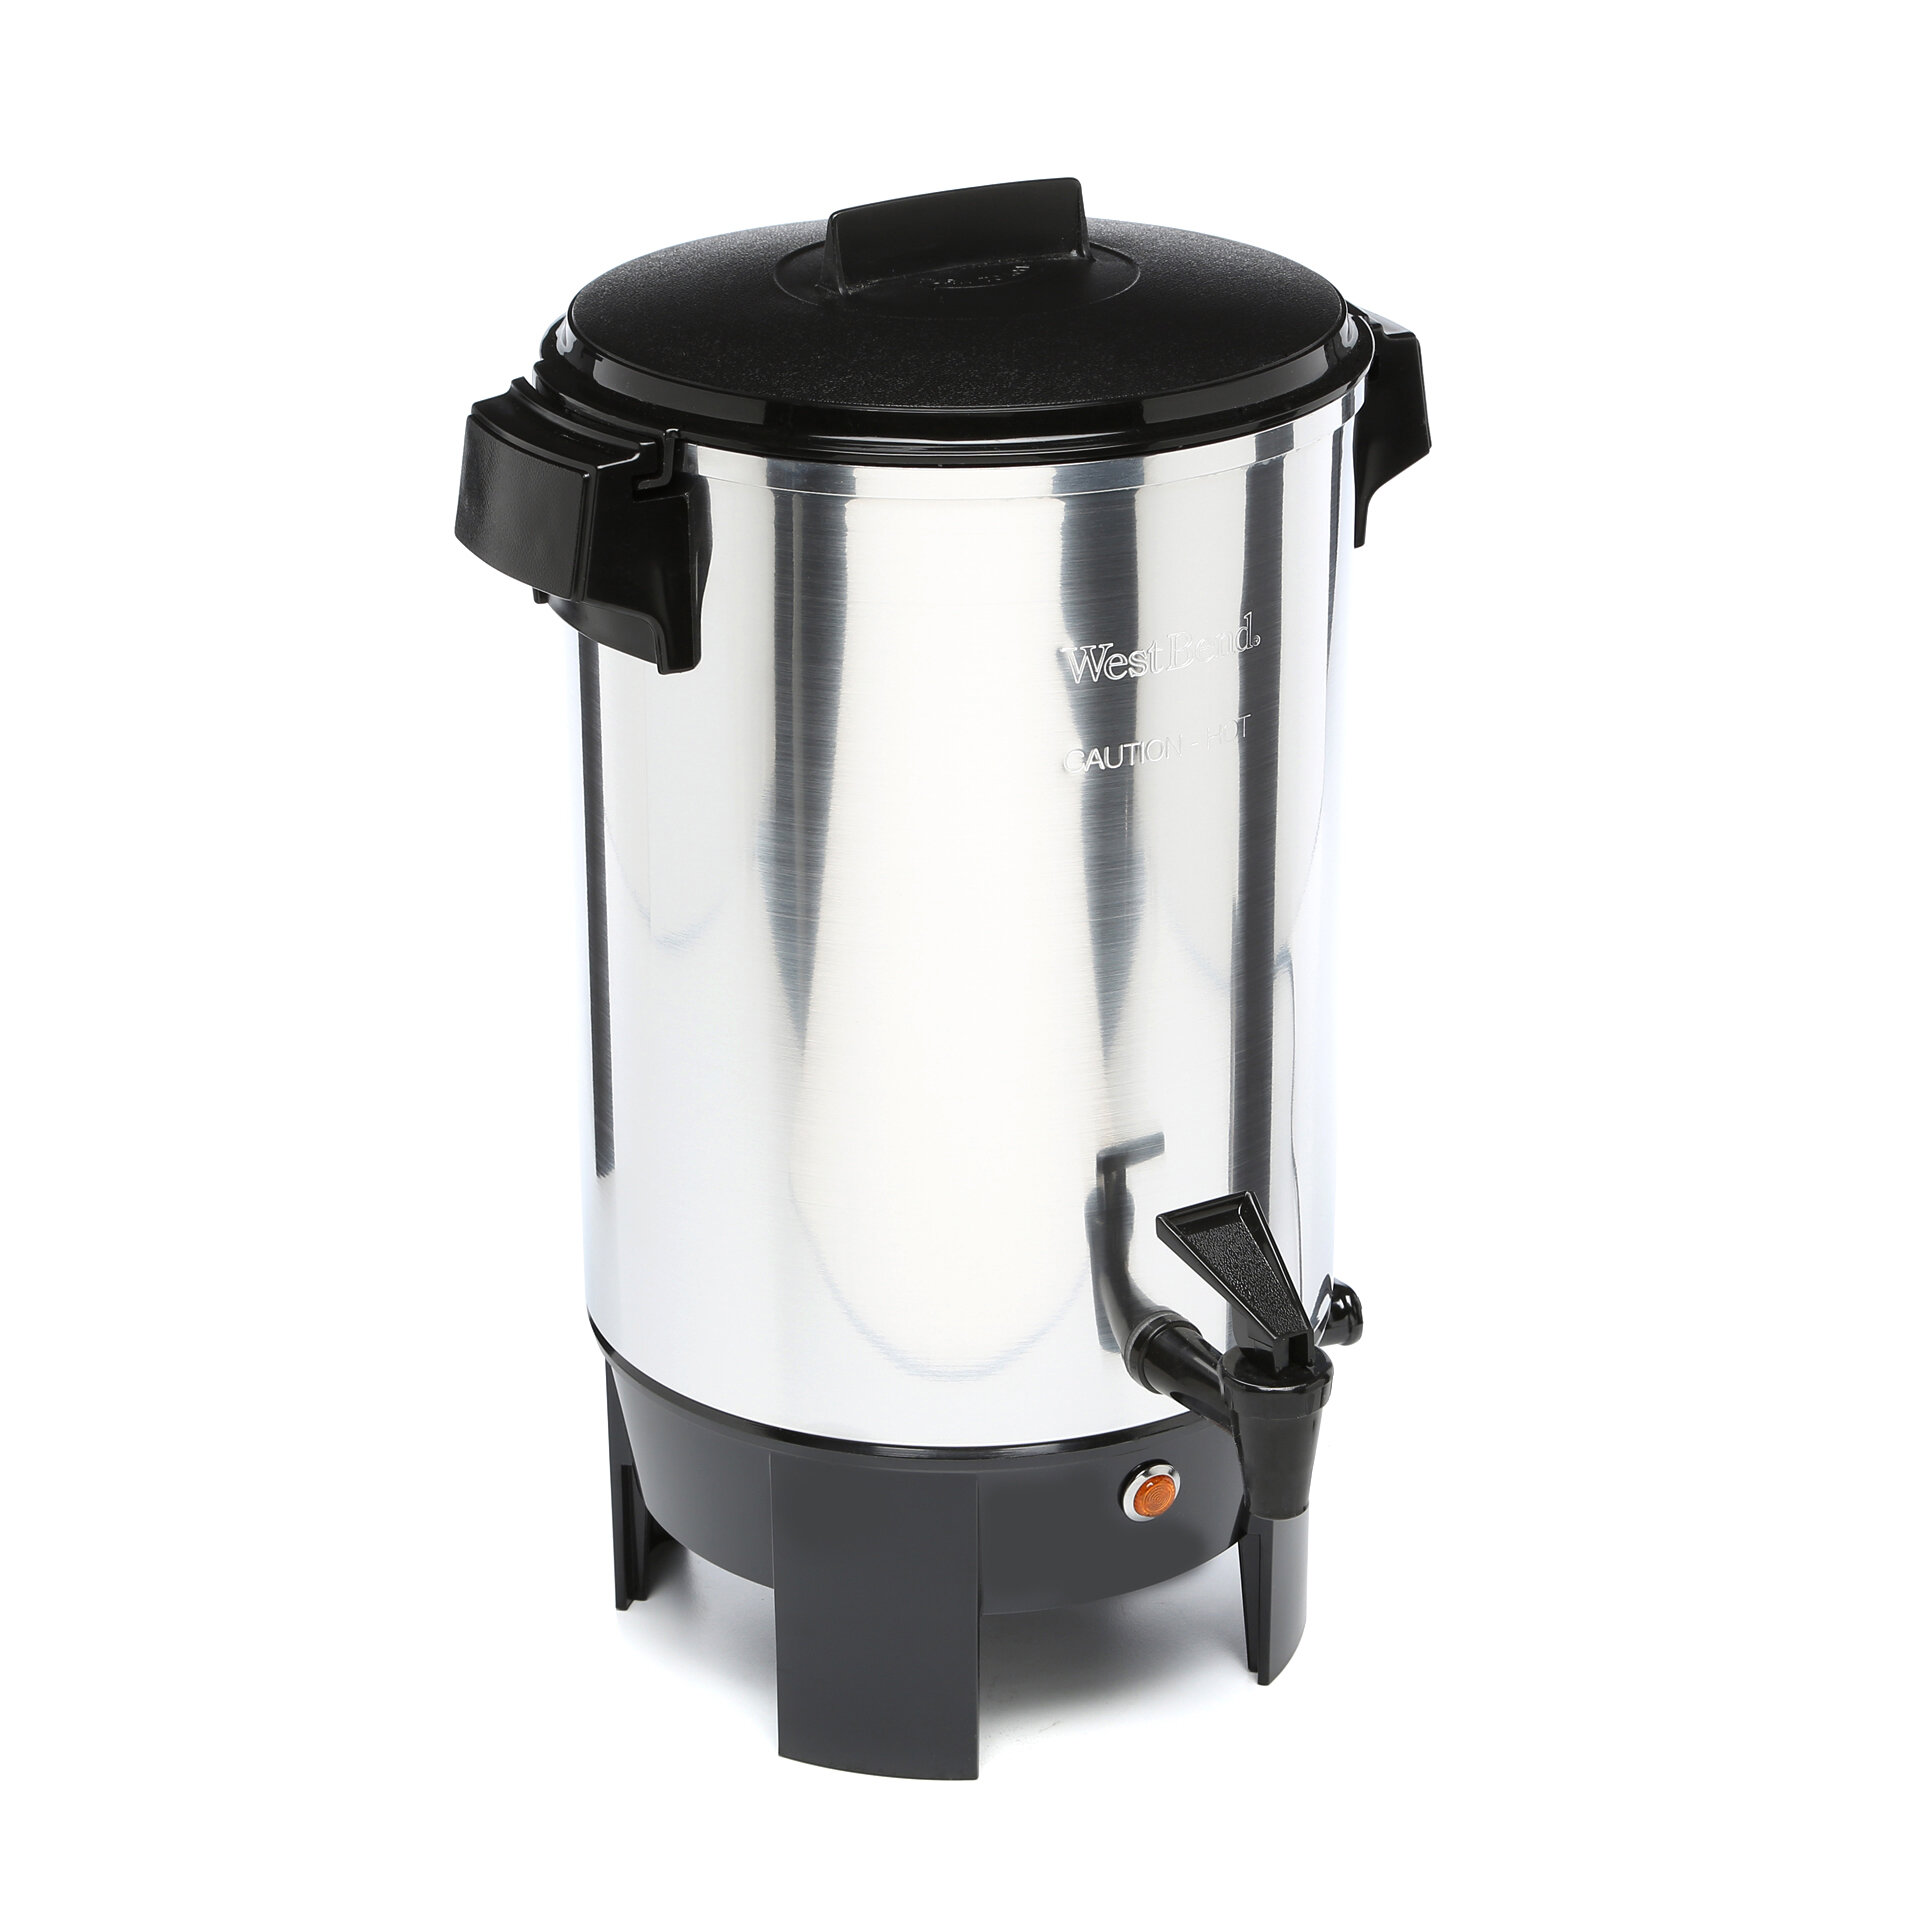 West Bend 30-Cup Polished Urn & Reviews